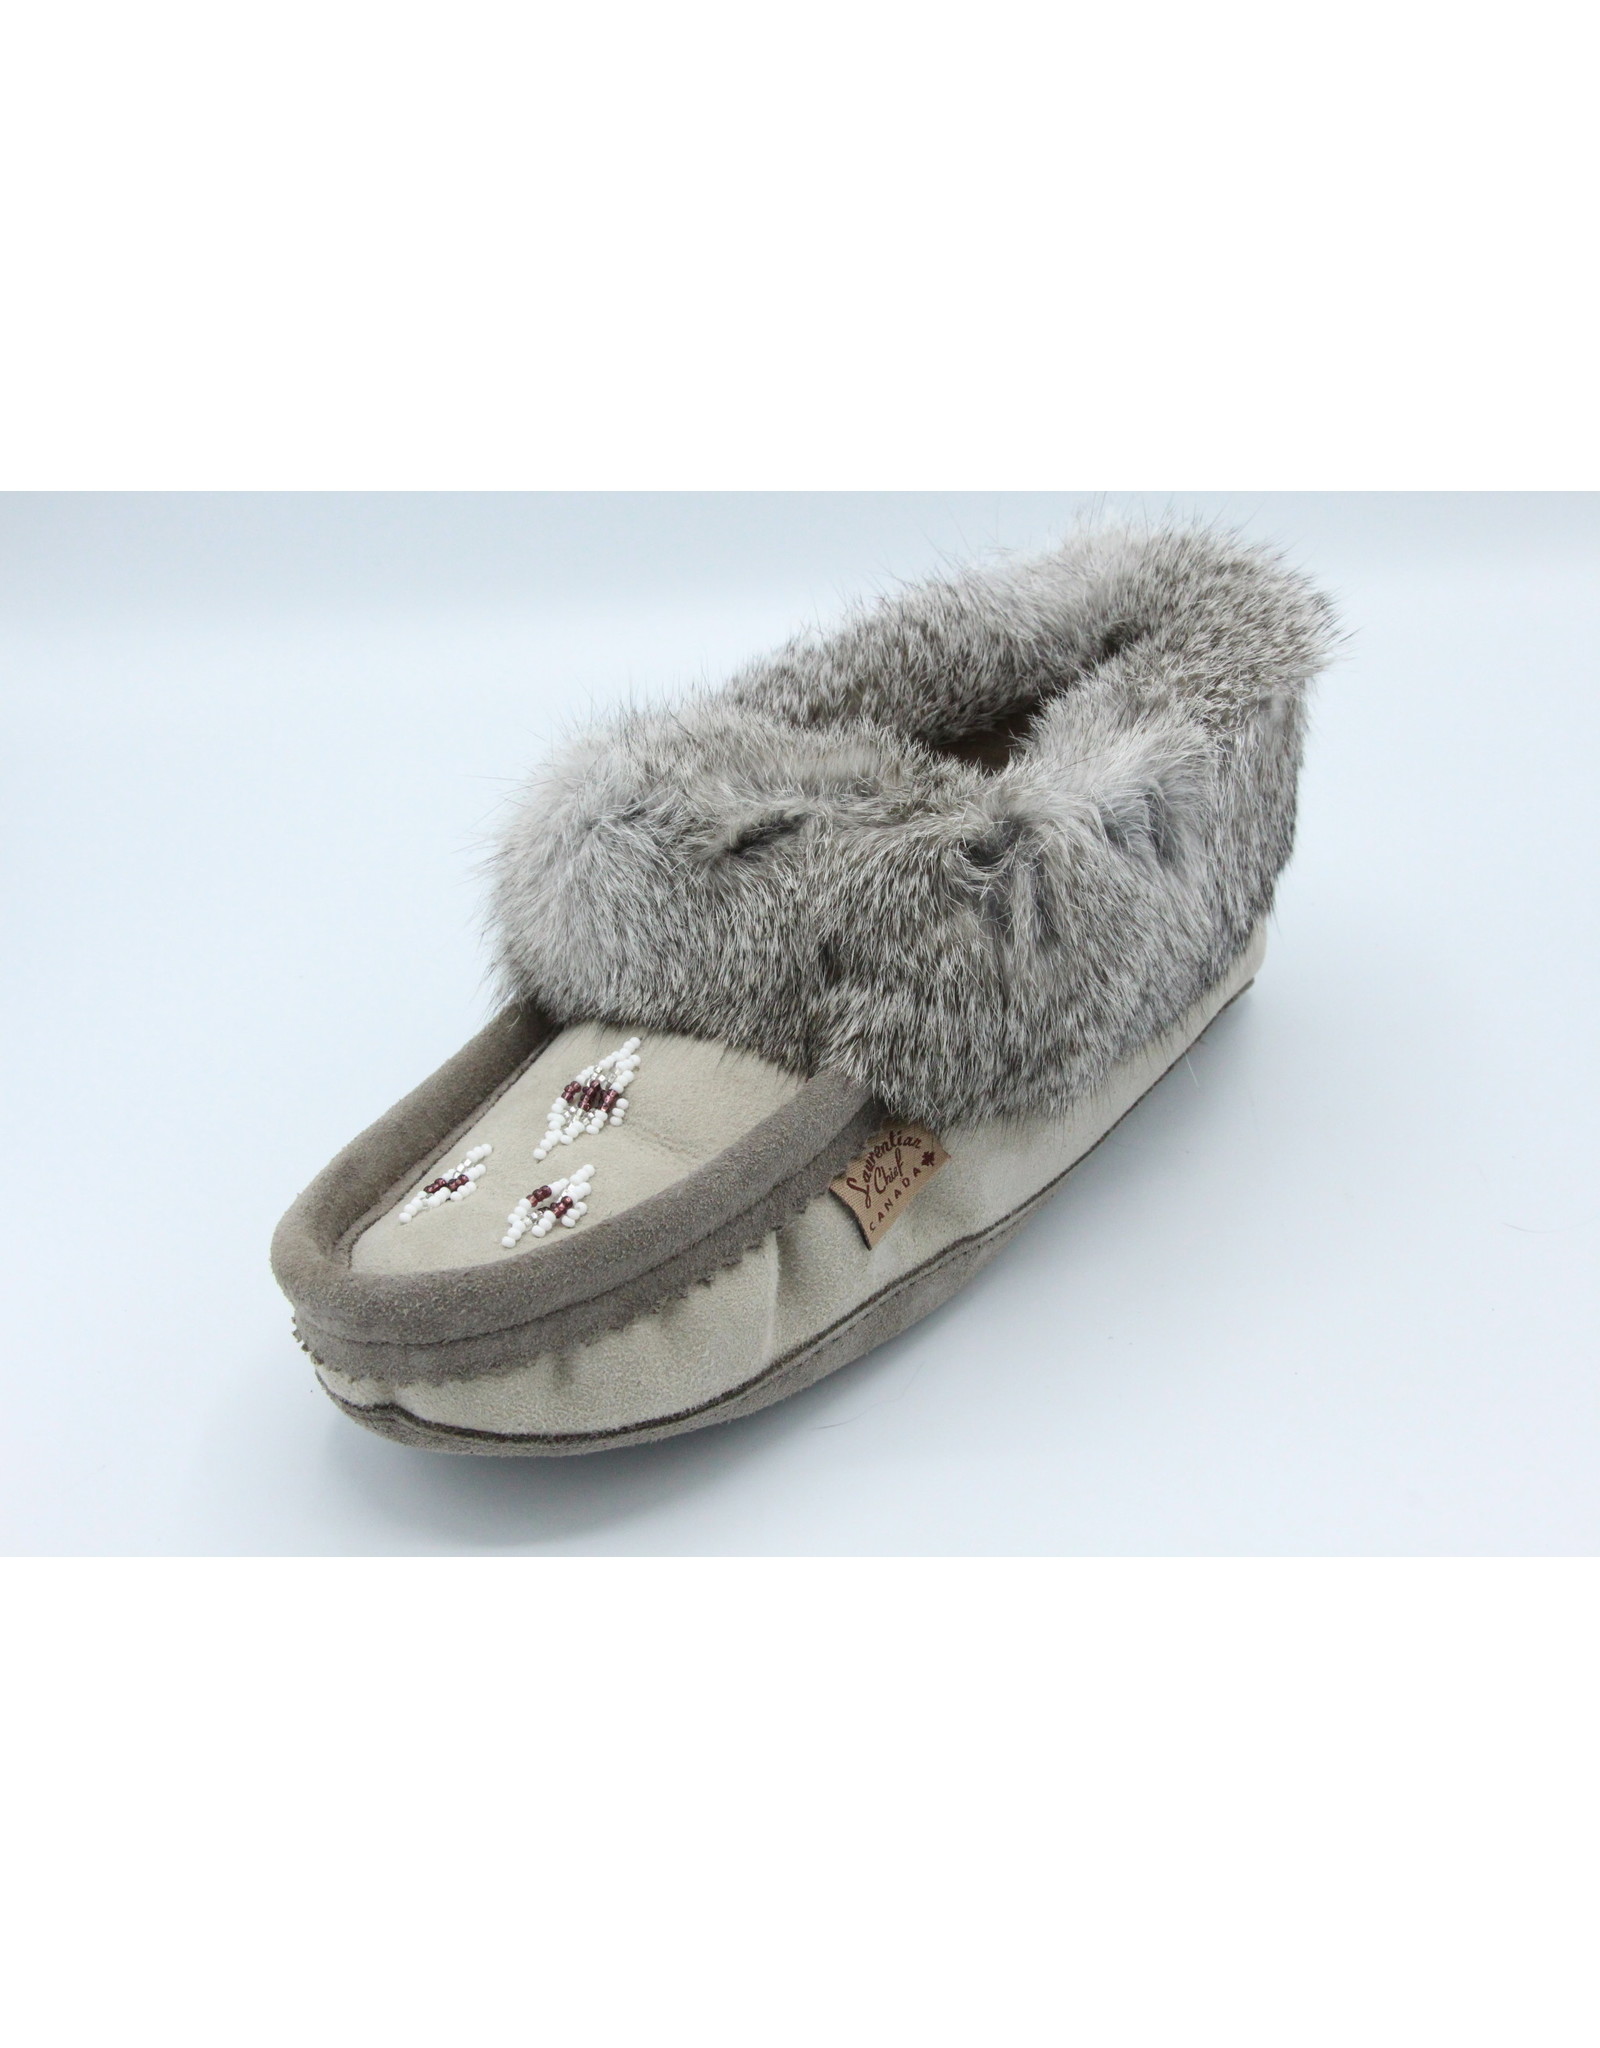 overthrow Suffocating Outlaw Grey Wool and Fur Moccasin Slipper - La Boutique Boréale